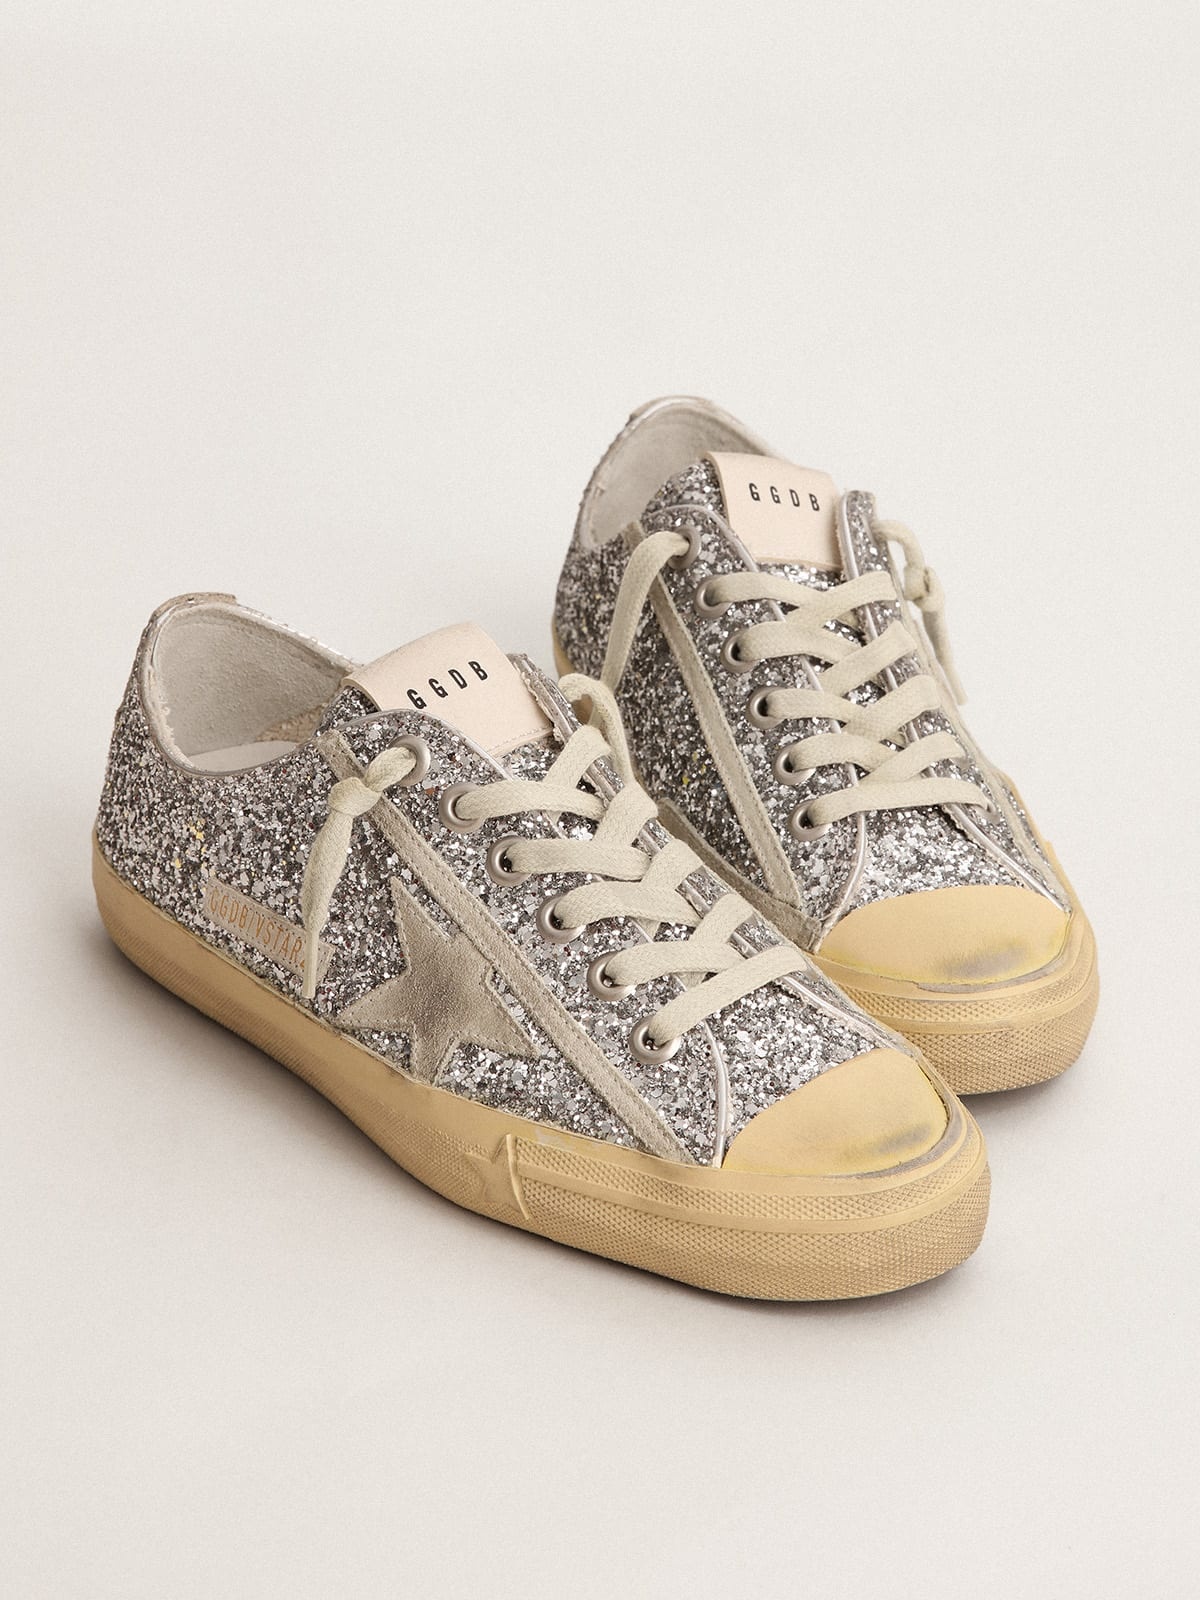 V-Star LTD sneakers in silver glitter with ice-gray suede star - 2